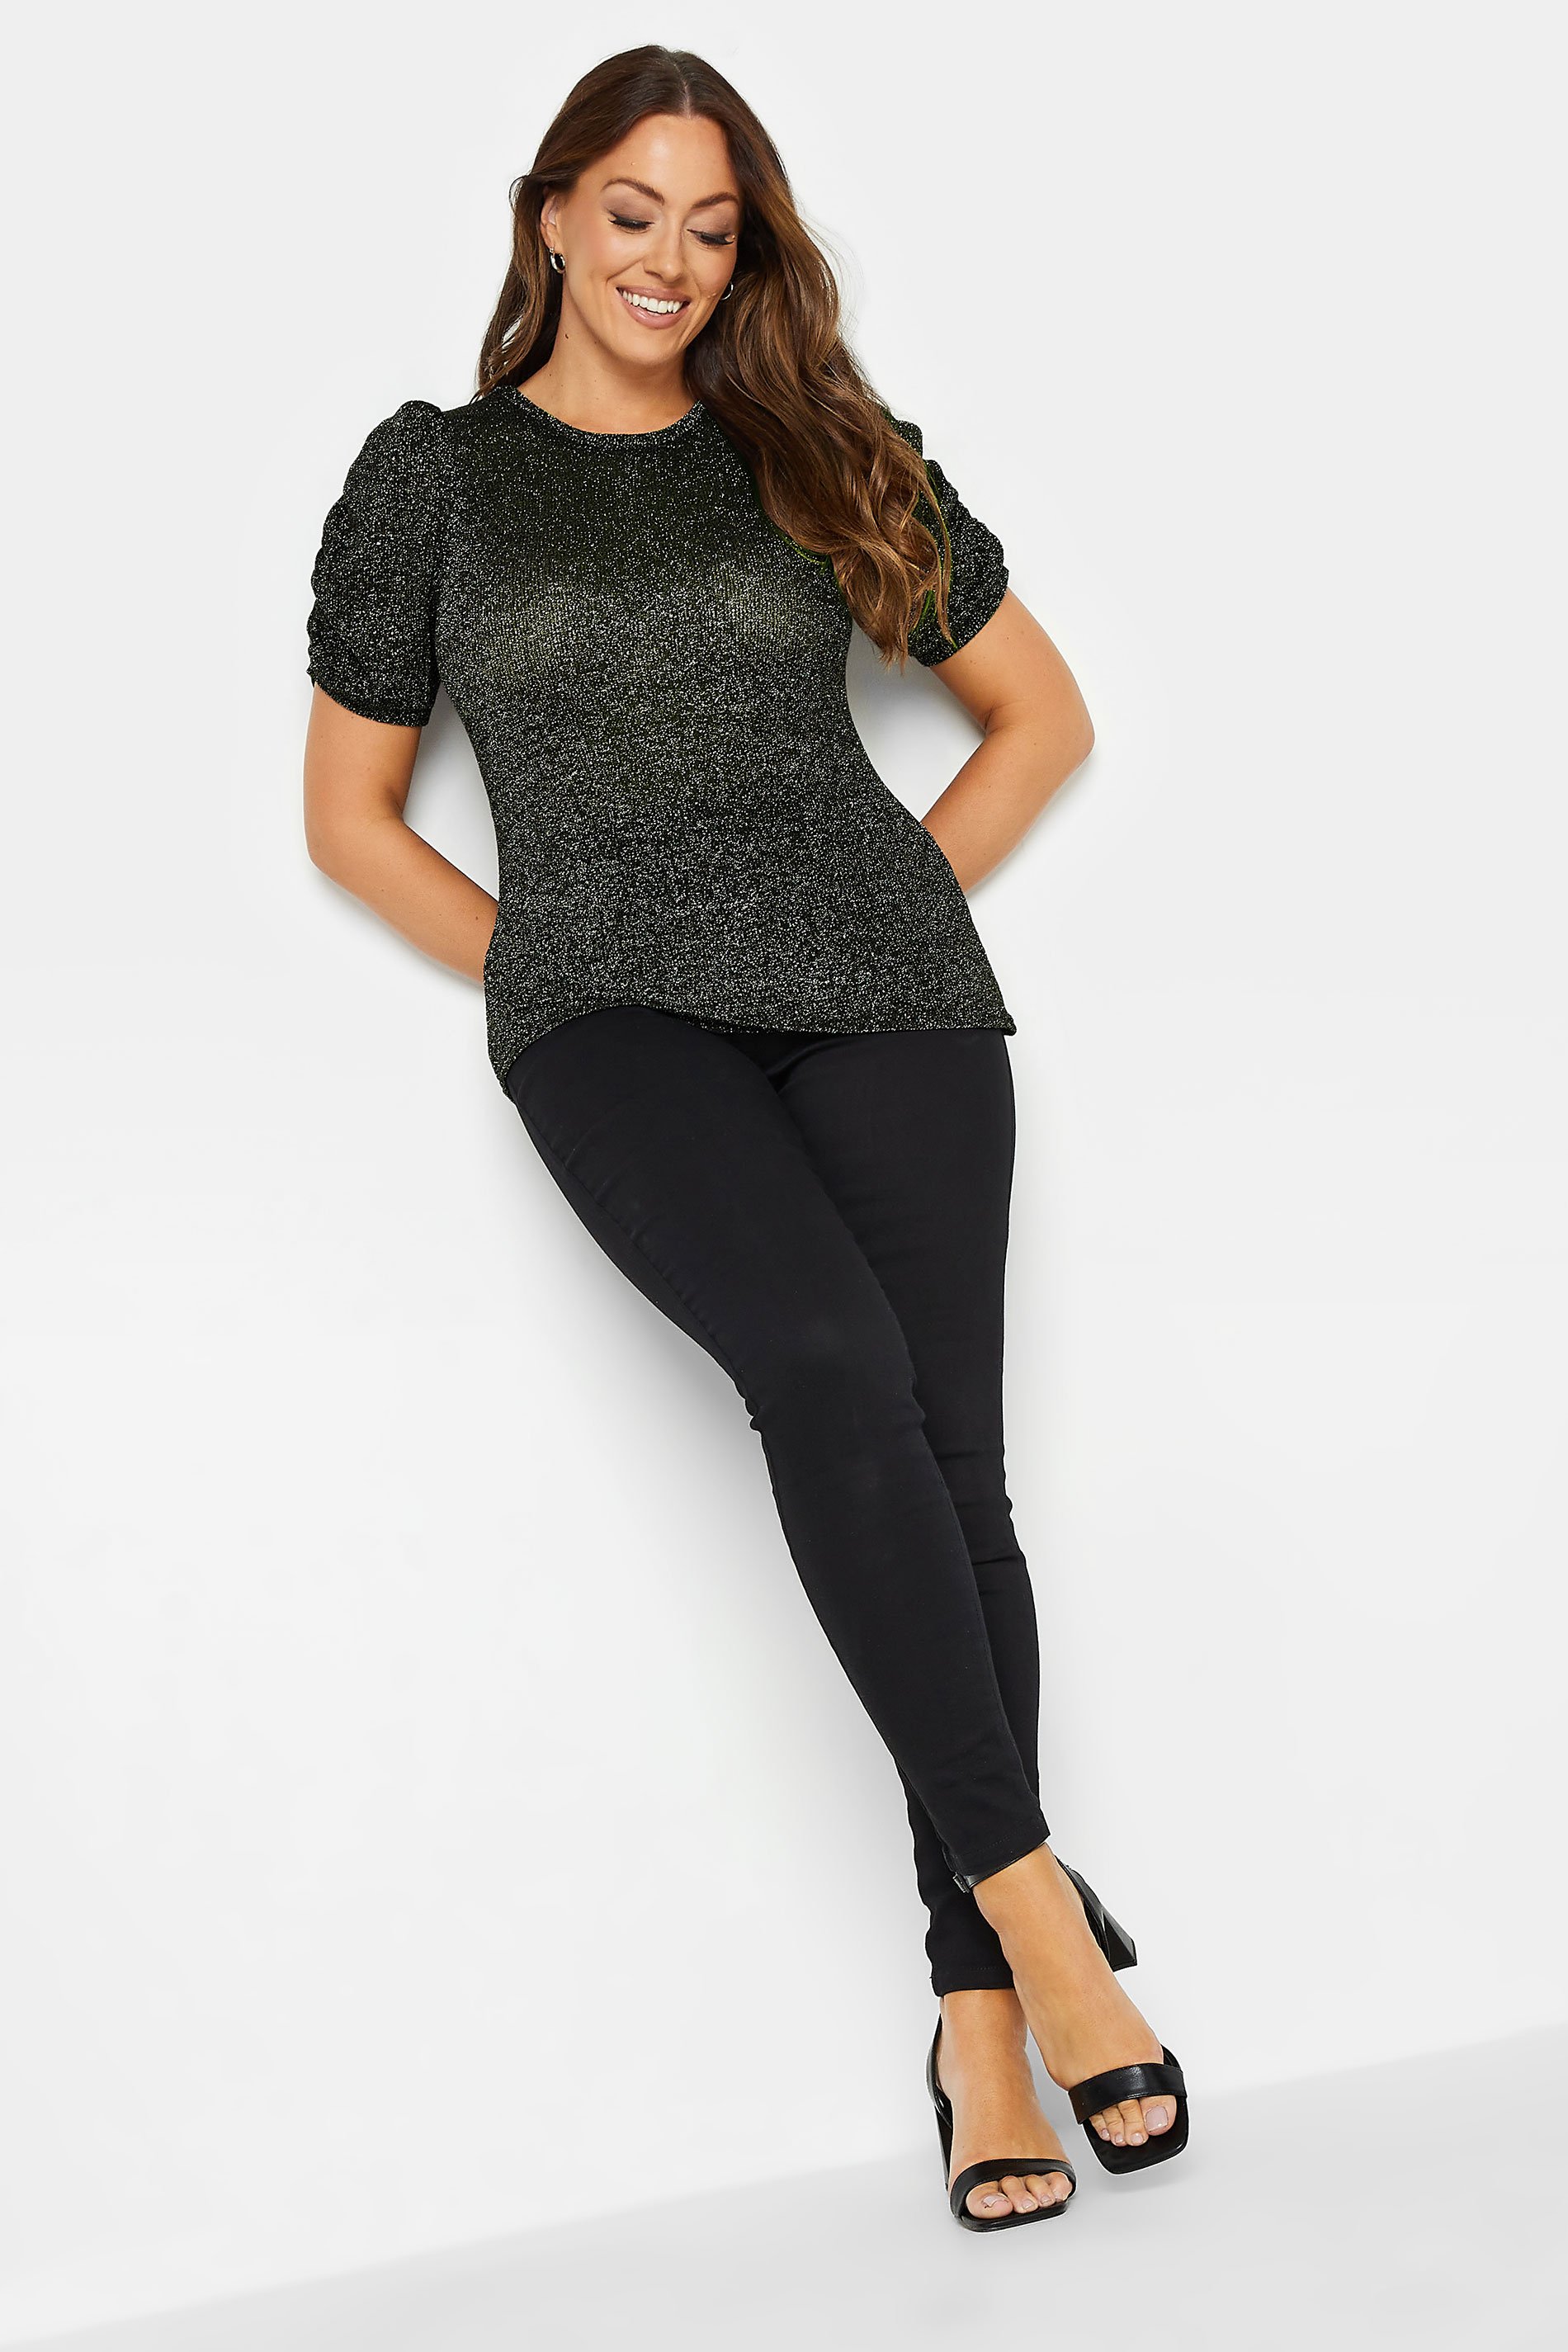 M&Co Black & Silver Shimmer Ruched Sleeve Blouse | M&Co 2